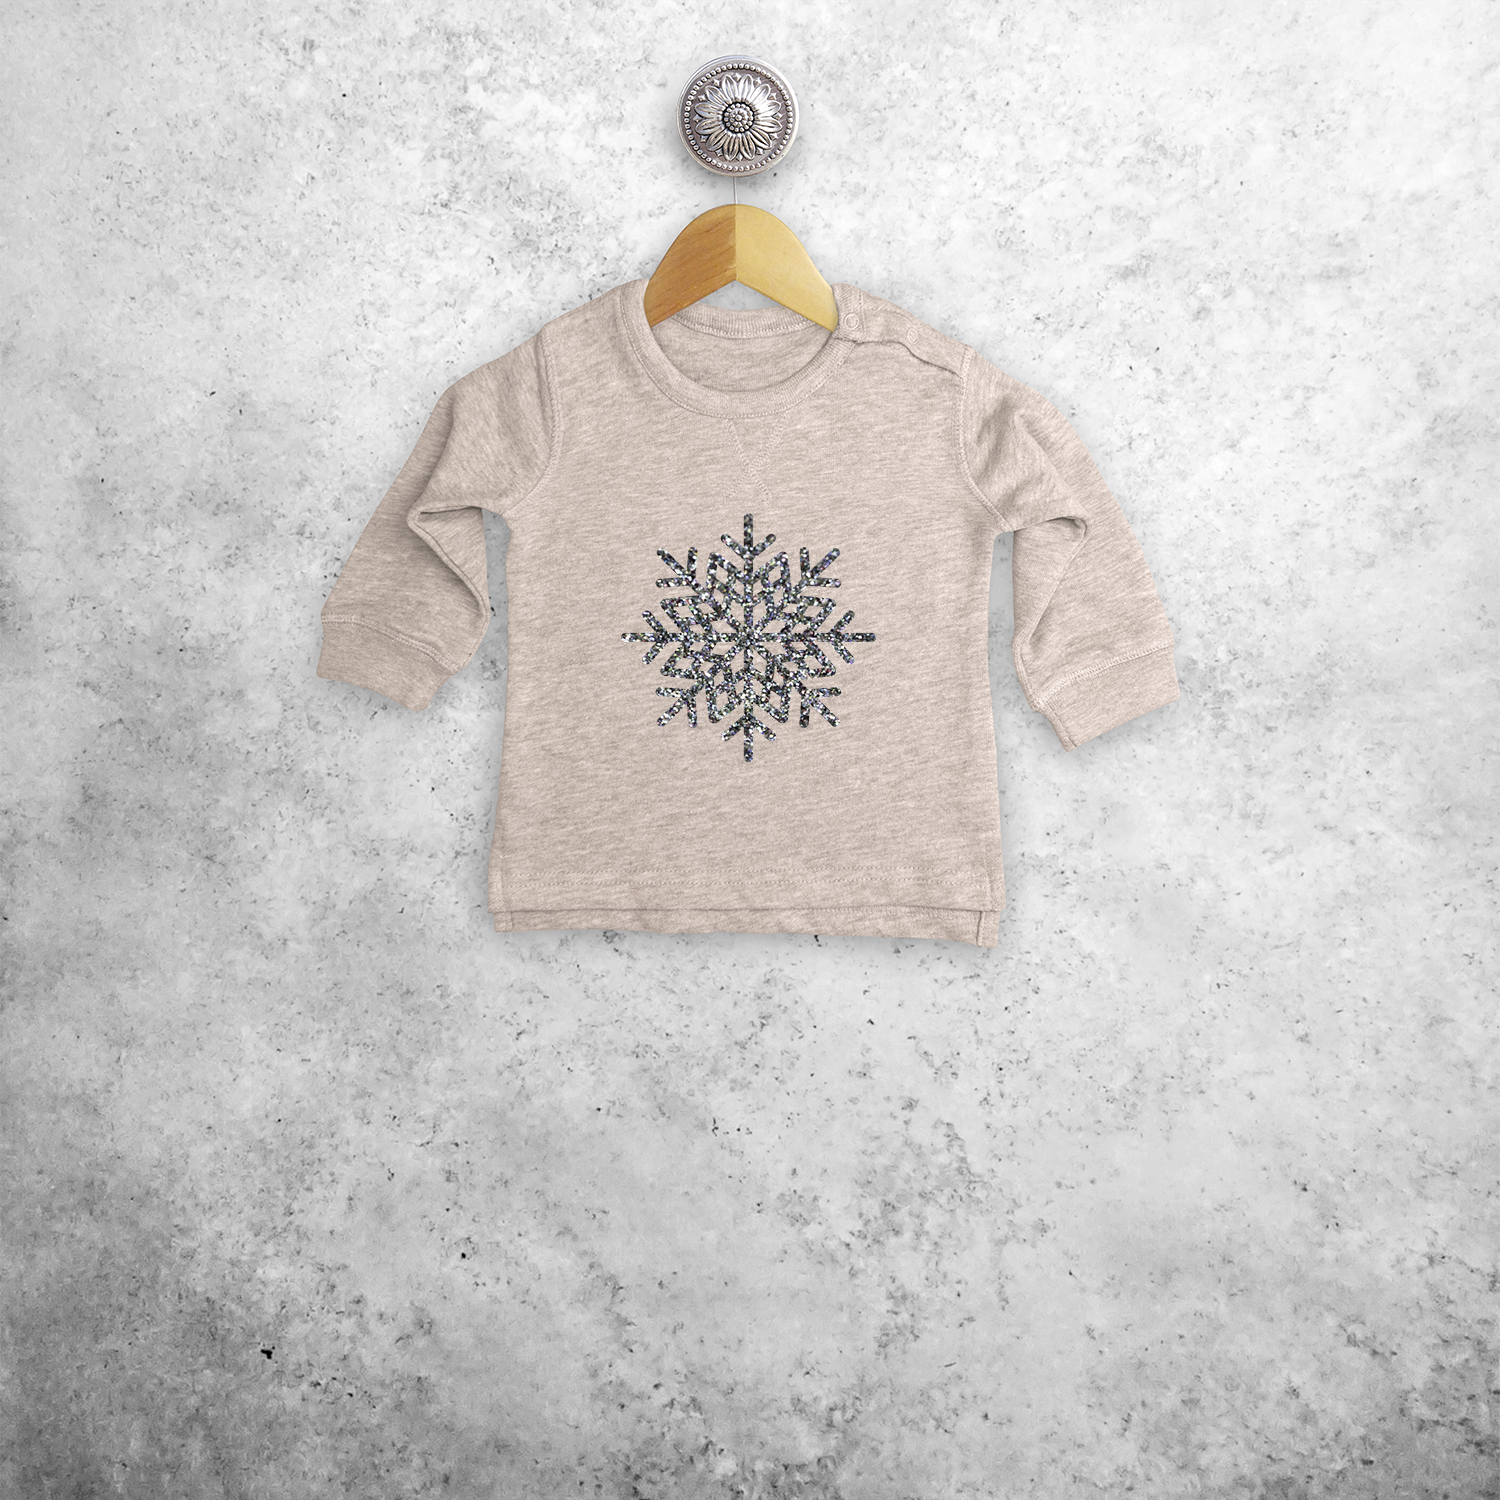 Baby or toddler sweater, with glitter snow star print by KMLeon.